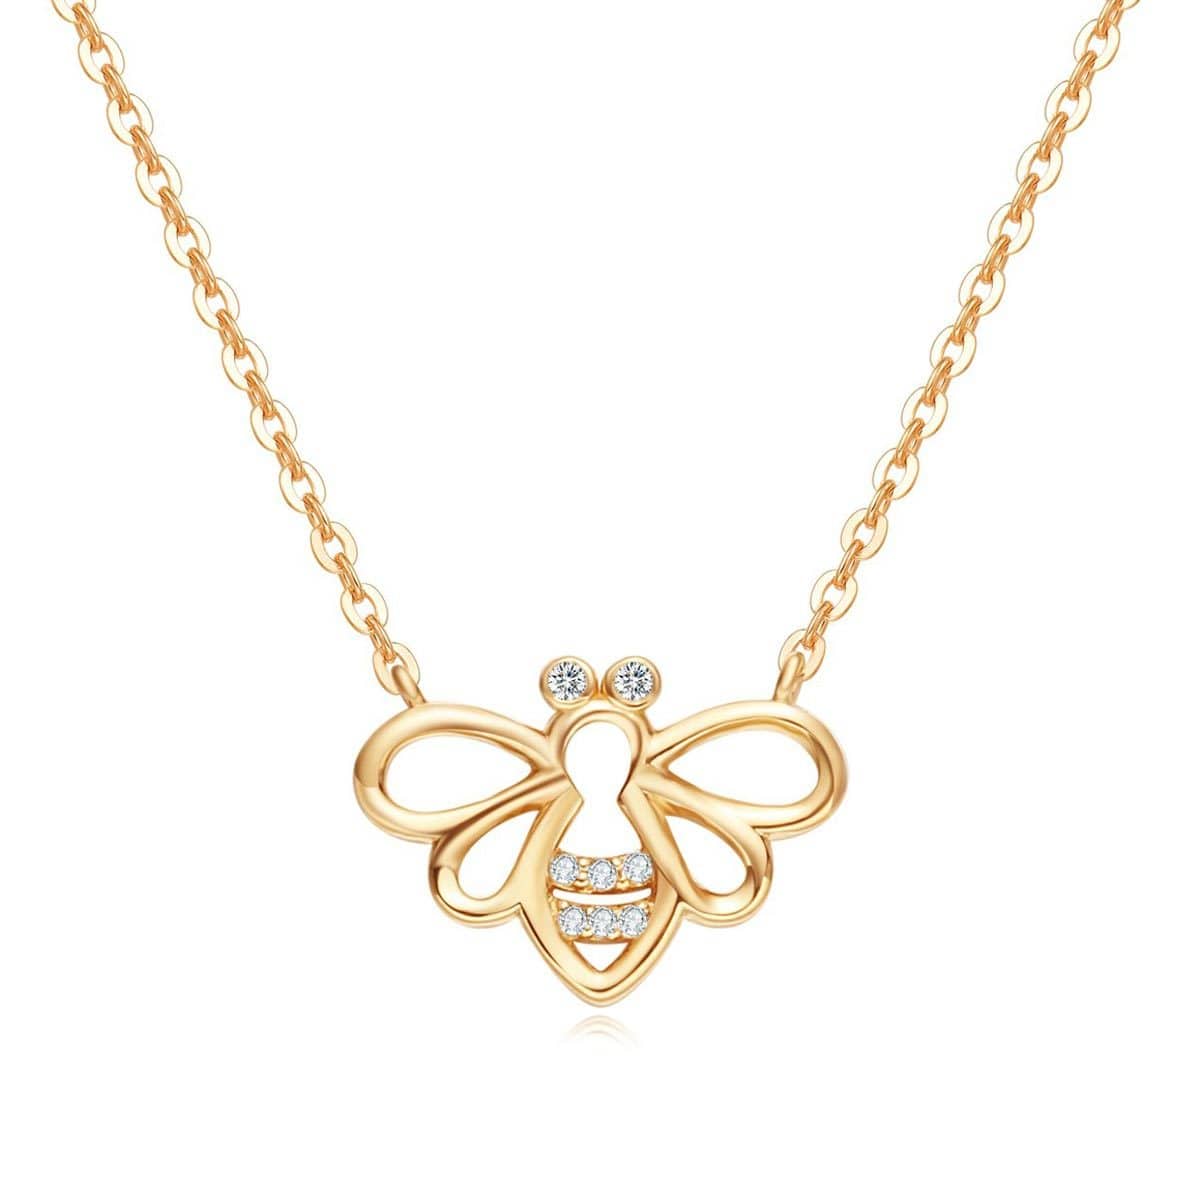 Fancime "Be Bright" Minimalist Dainty Bee Yellow Gold Necklace Main